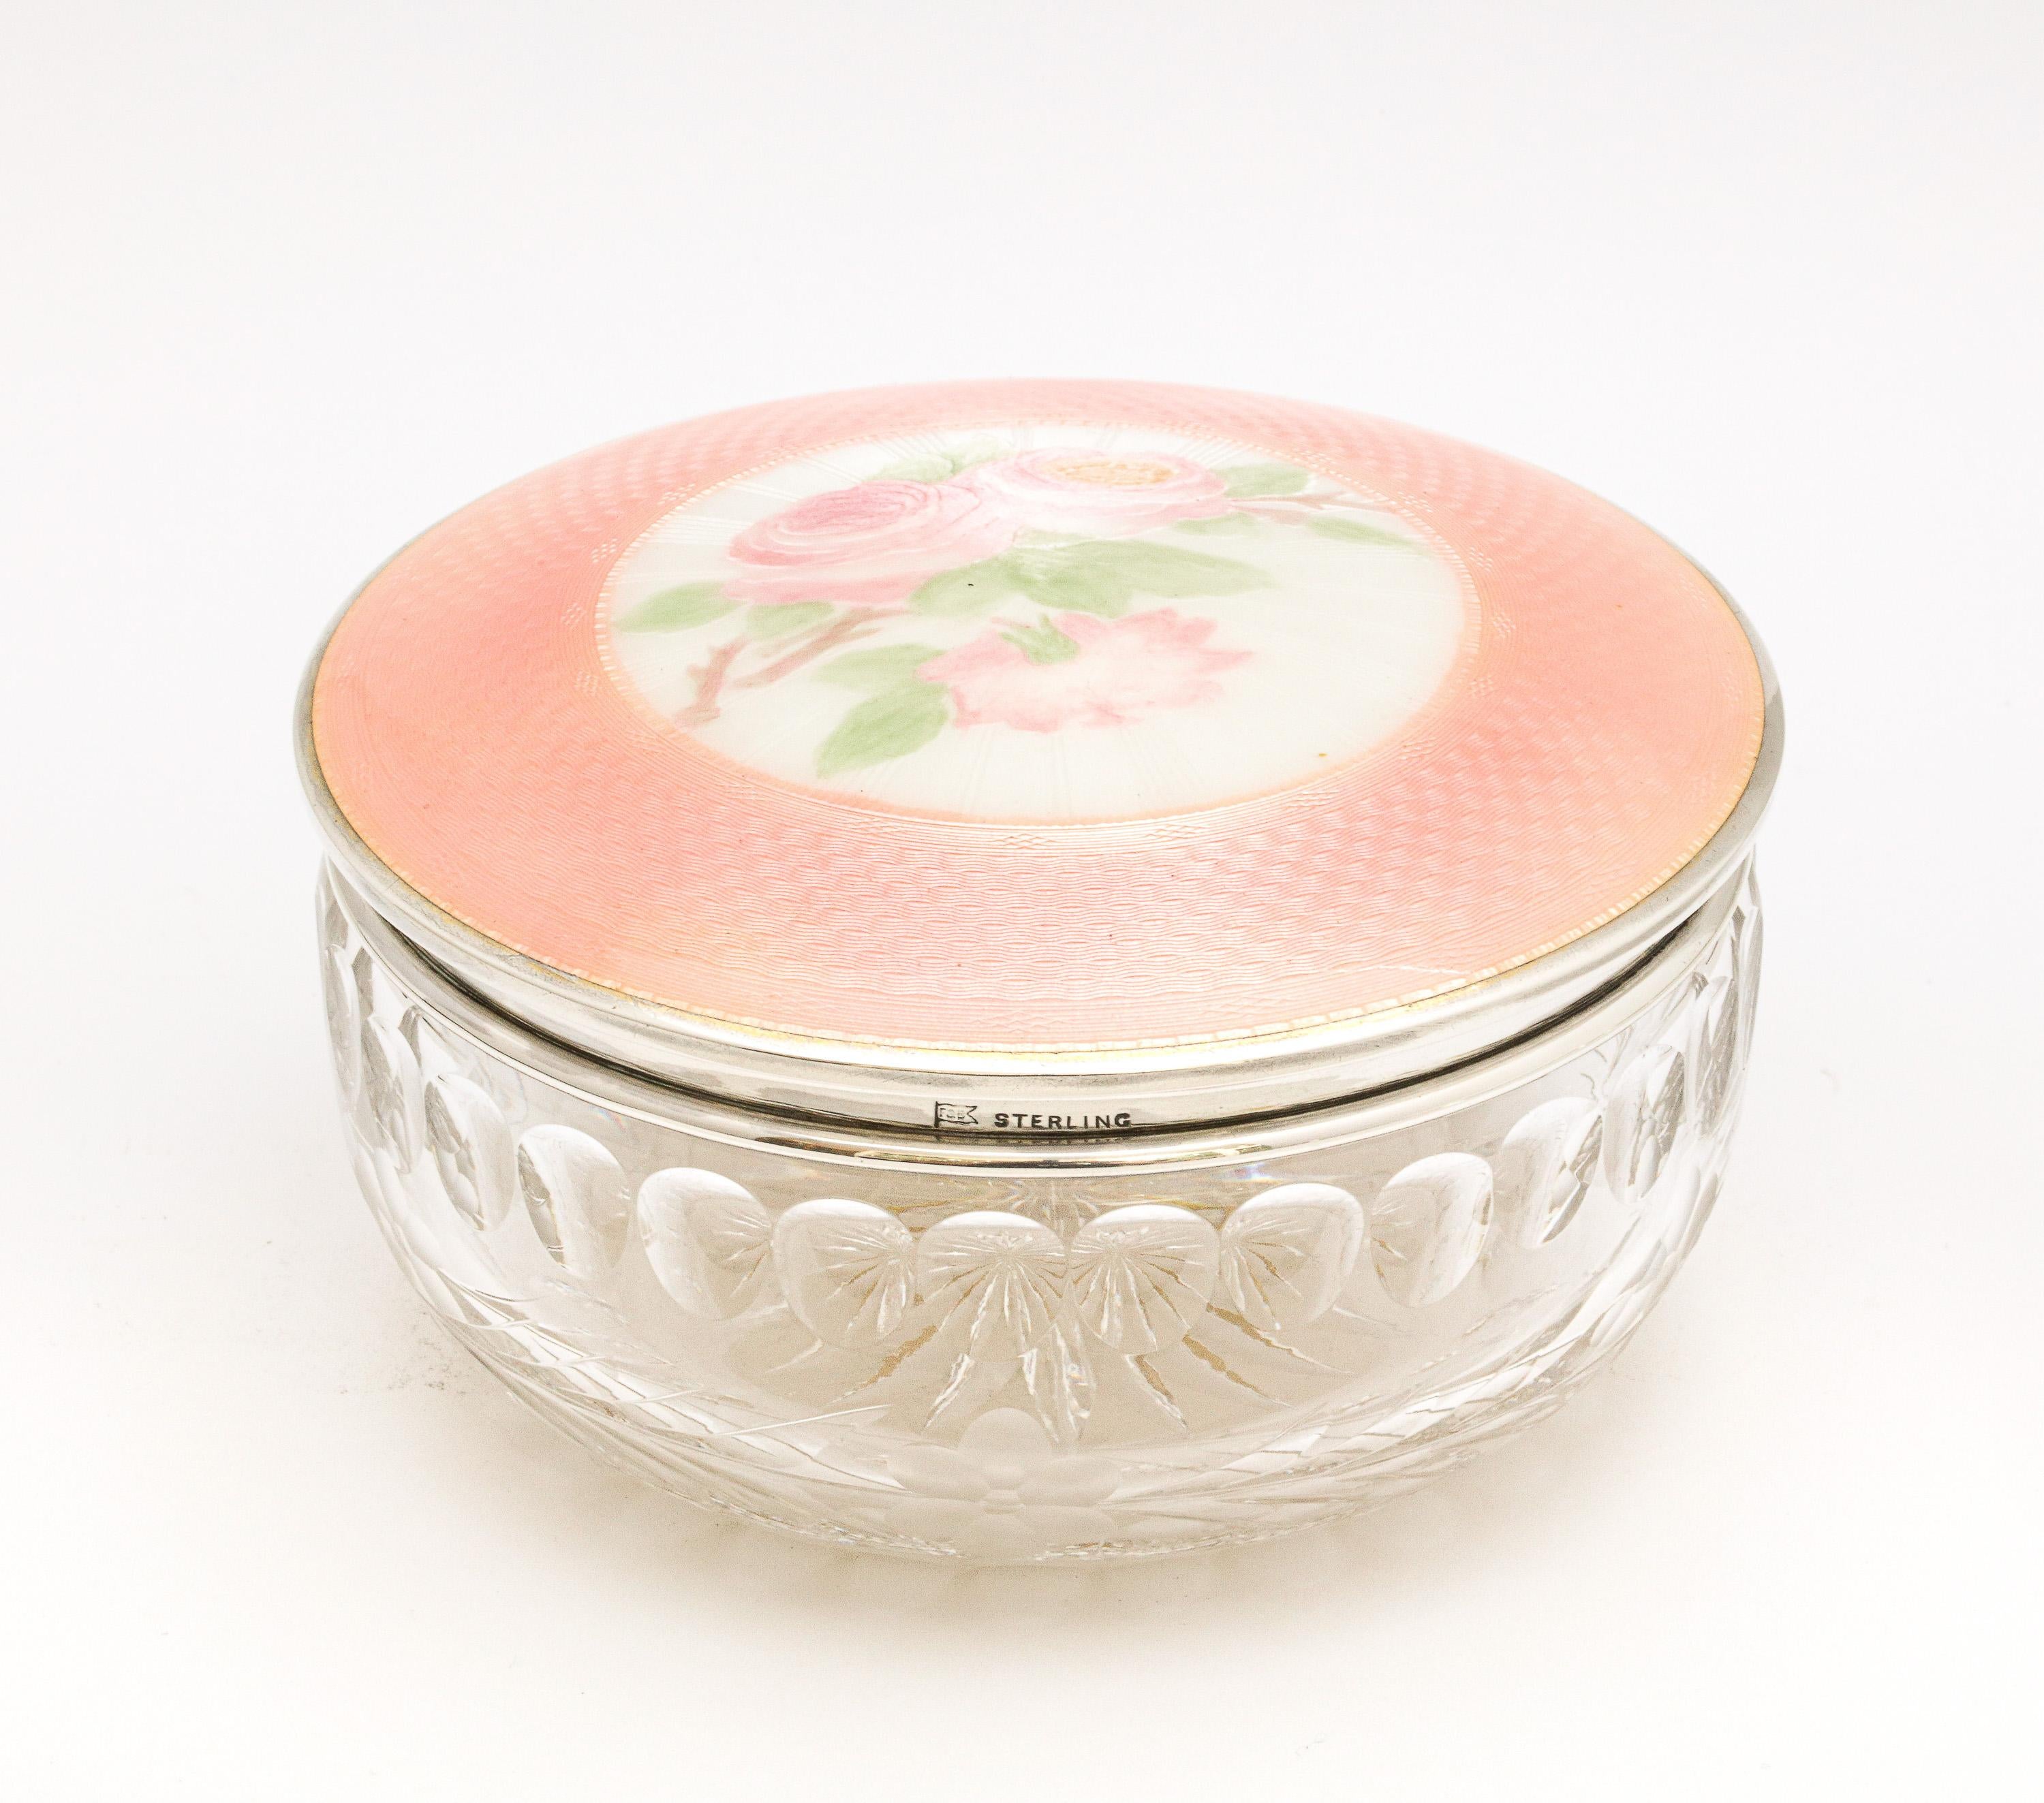 Late 19th Century Victorian Period Sterling Silver and Peach Enamel, Mounted Crystal Dresser Jar For Sale